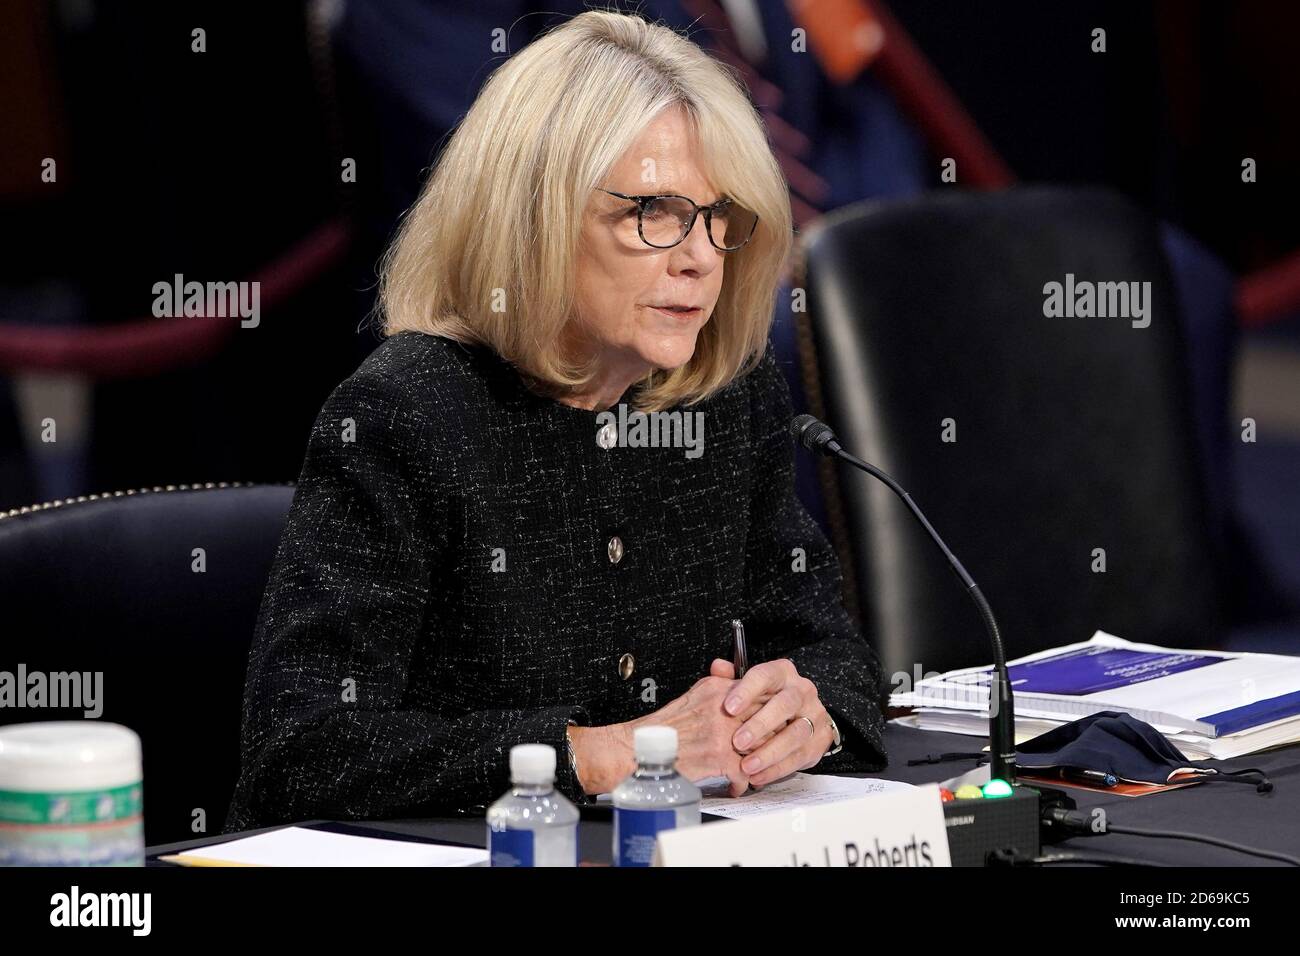 Lawyer Pamela J. Roberts testifies during a Senate Judiciary Committee confirmation hearing of President Donald Trump’s Supreme Court nominee Judge Amy Coney Barrett on Thursday, October 15, 2020. (Photo by Greg Nash/Pool/Sipa USA) Stock Photo